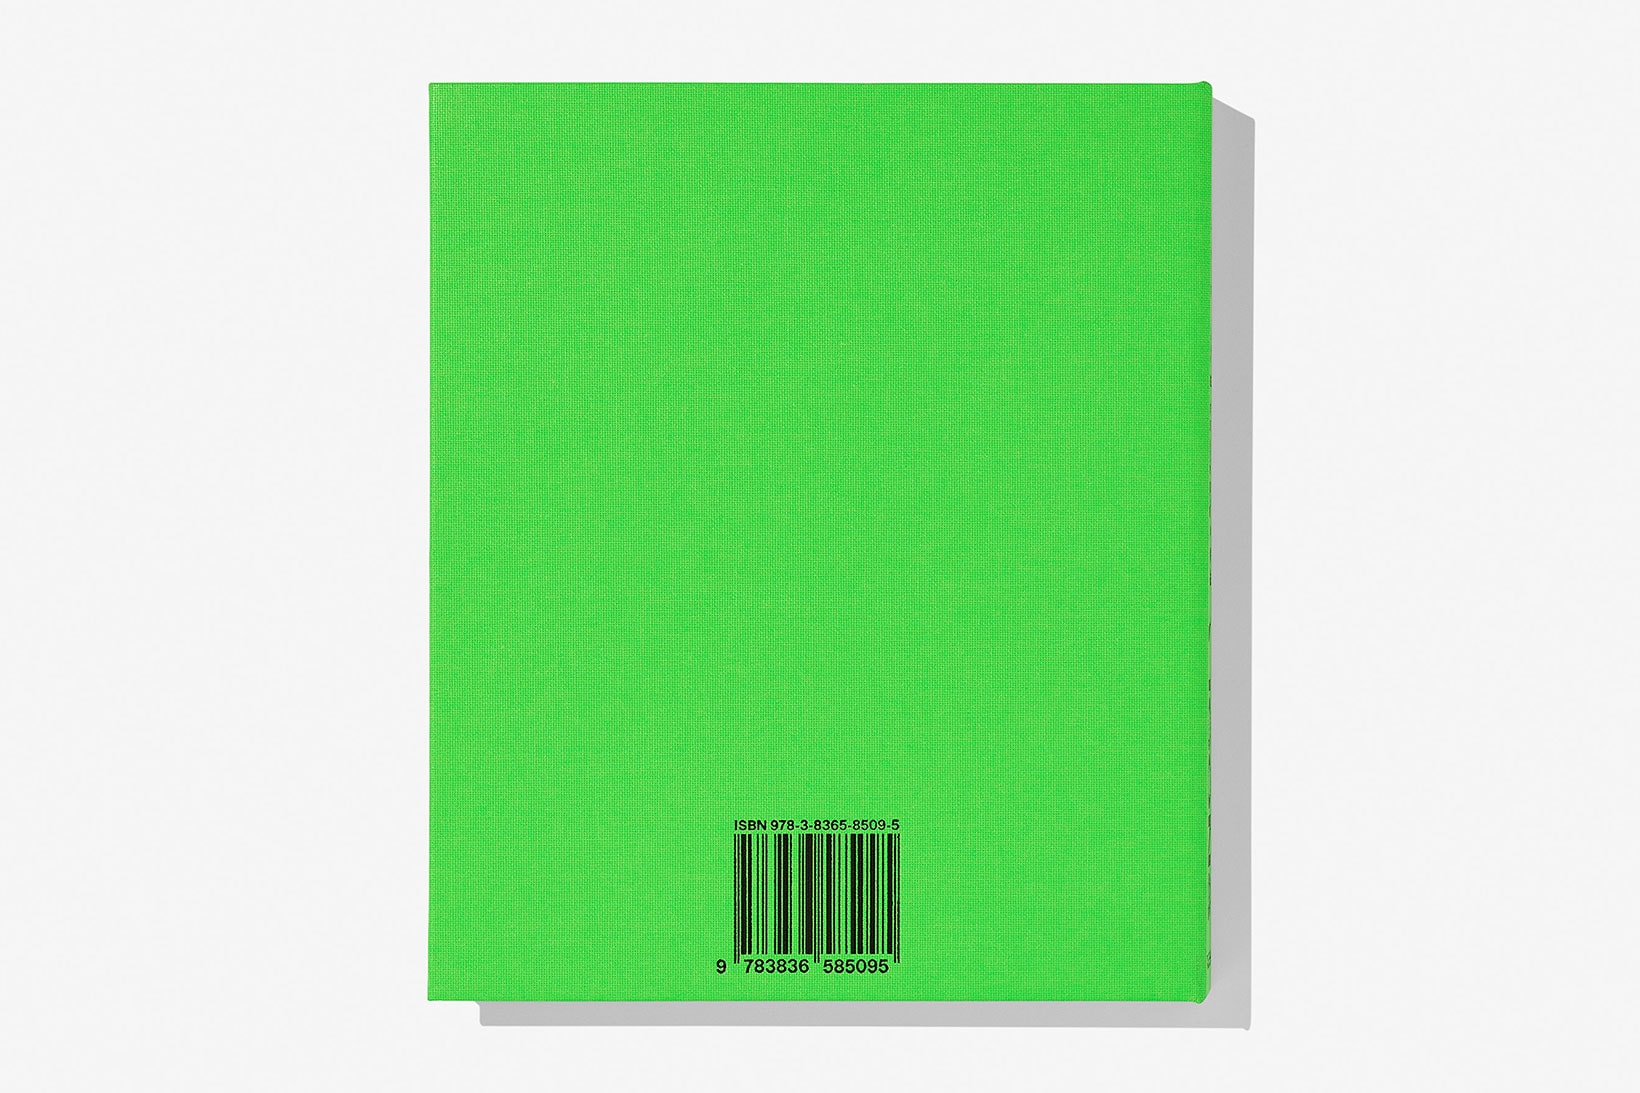 virgil abloh nike icons book retrospective collaboration taschen off-white neon green back cover